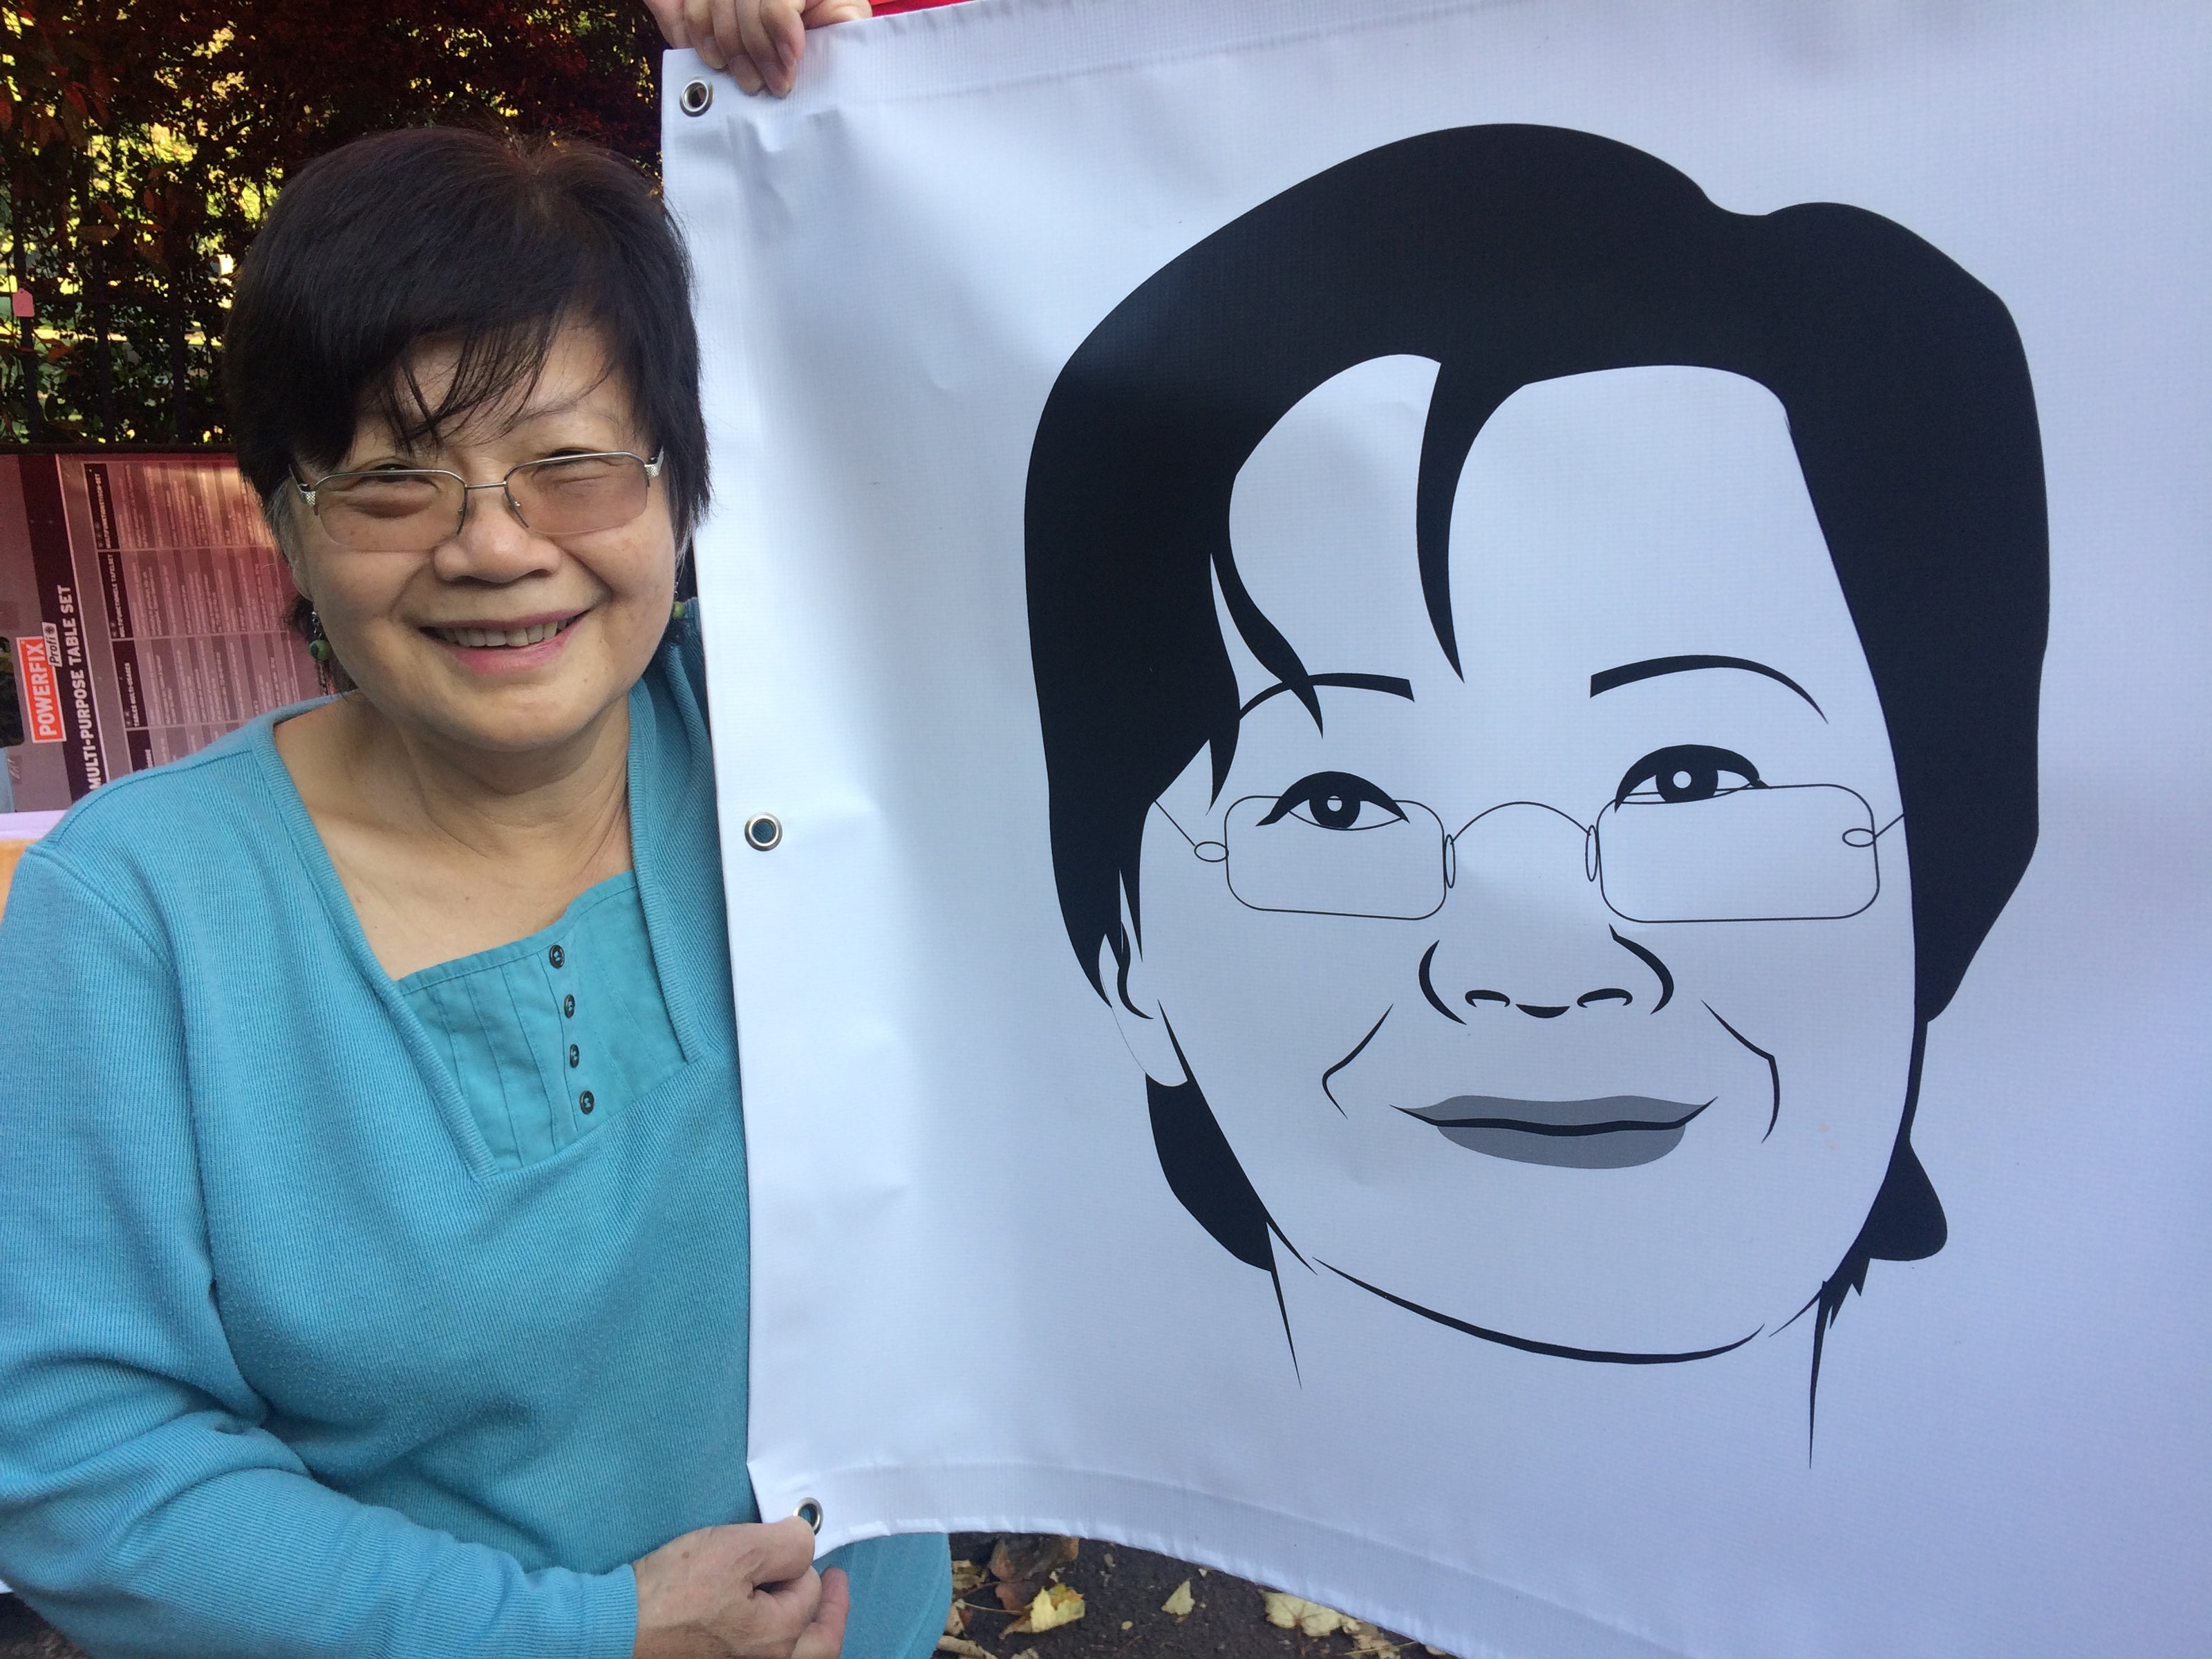 Yok Chan holding a banner with her face on it